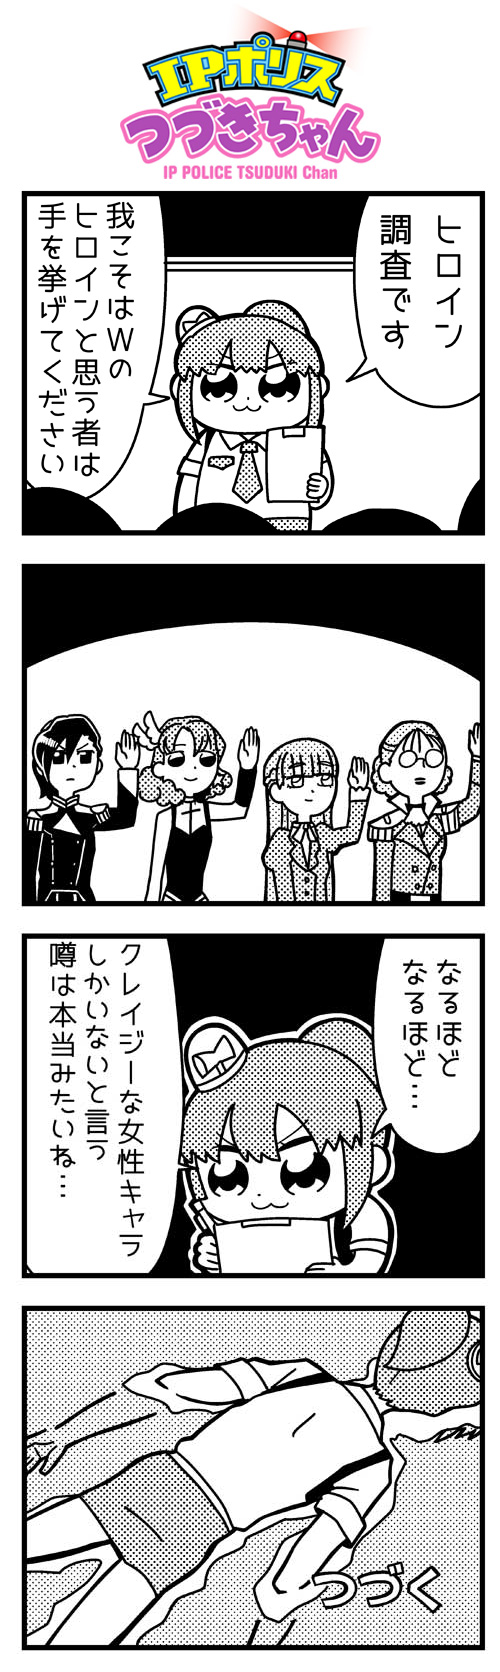 4koma 5girls :3 arm_up bangs bkub blunt_bangs character_request comic dress eyebrows_visible_through_hair feathers formal glasses greyscale gundam gundam_wing hair_feathers hair_ornament highres holding ip_police_tsuduki_chan long_hair monochrome multiple_girls neck_ribbon necktie pencil ponytail ribbon shallow_water shirt short_hair simple_background skirt smile speech_bubble suit suspenders swept_bangs talking translation_request tsuduki-chan two-tone_background two_side_up uniform